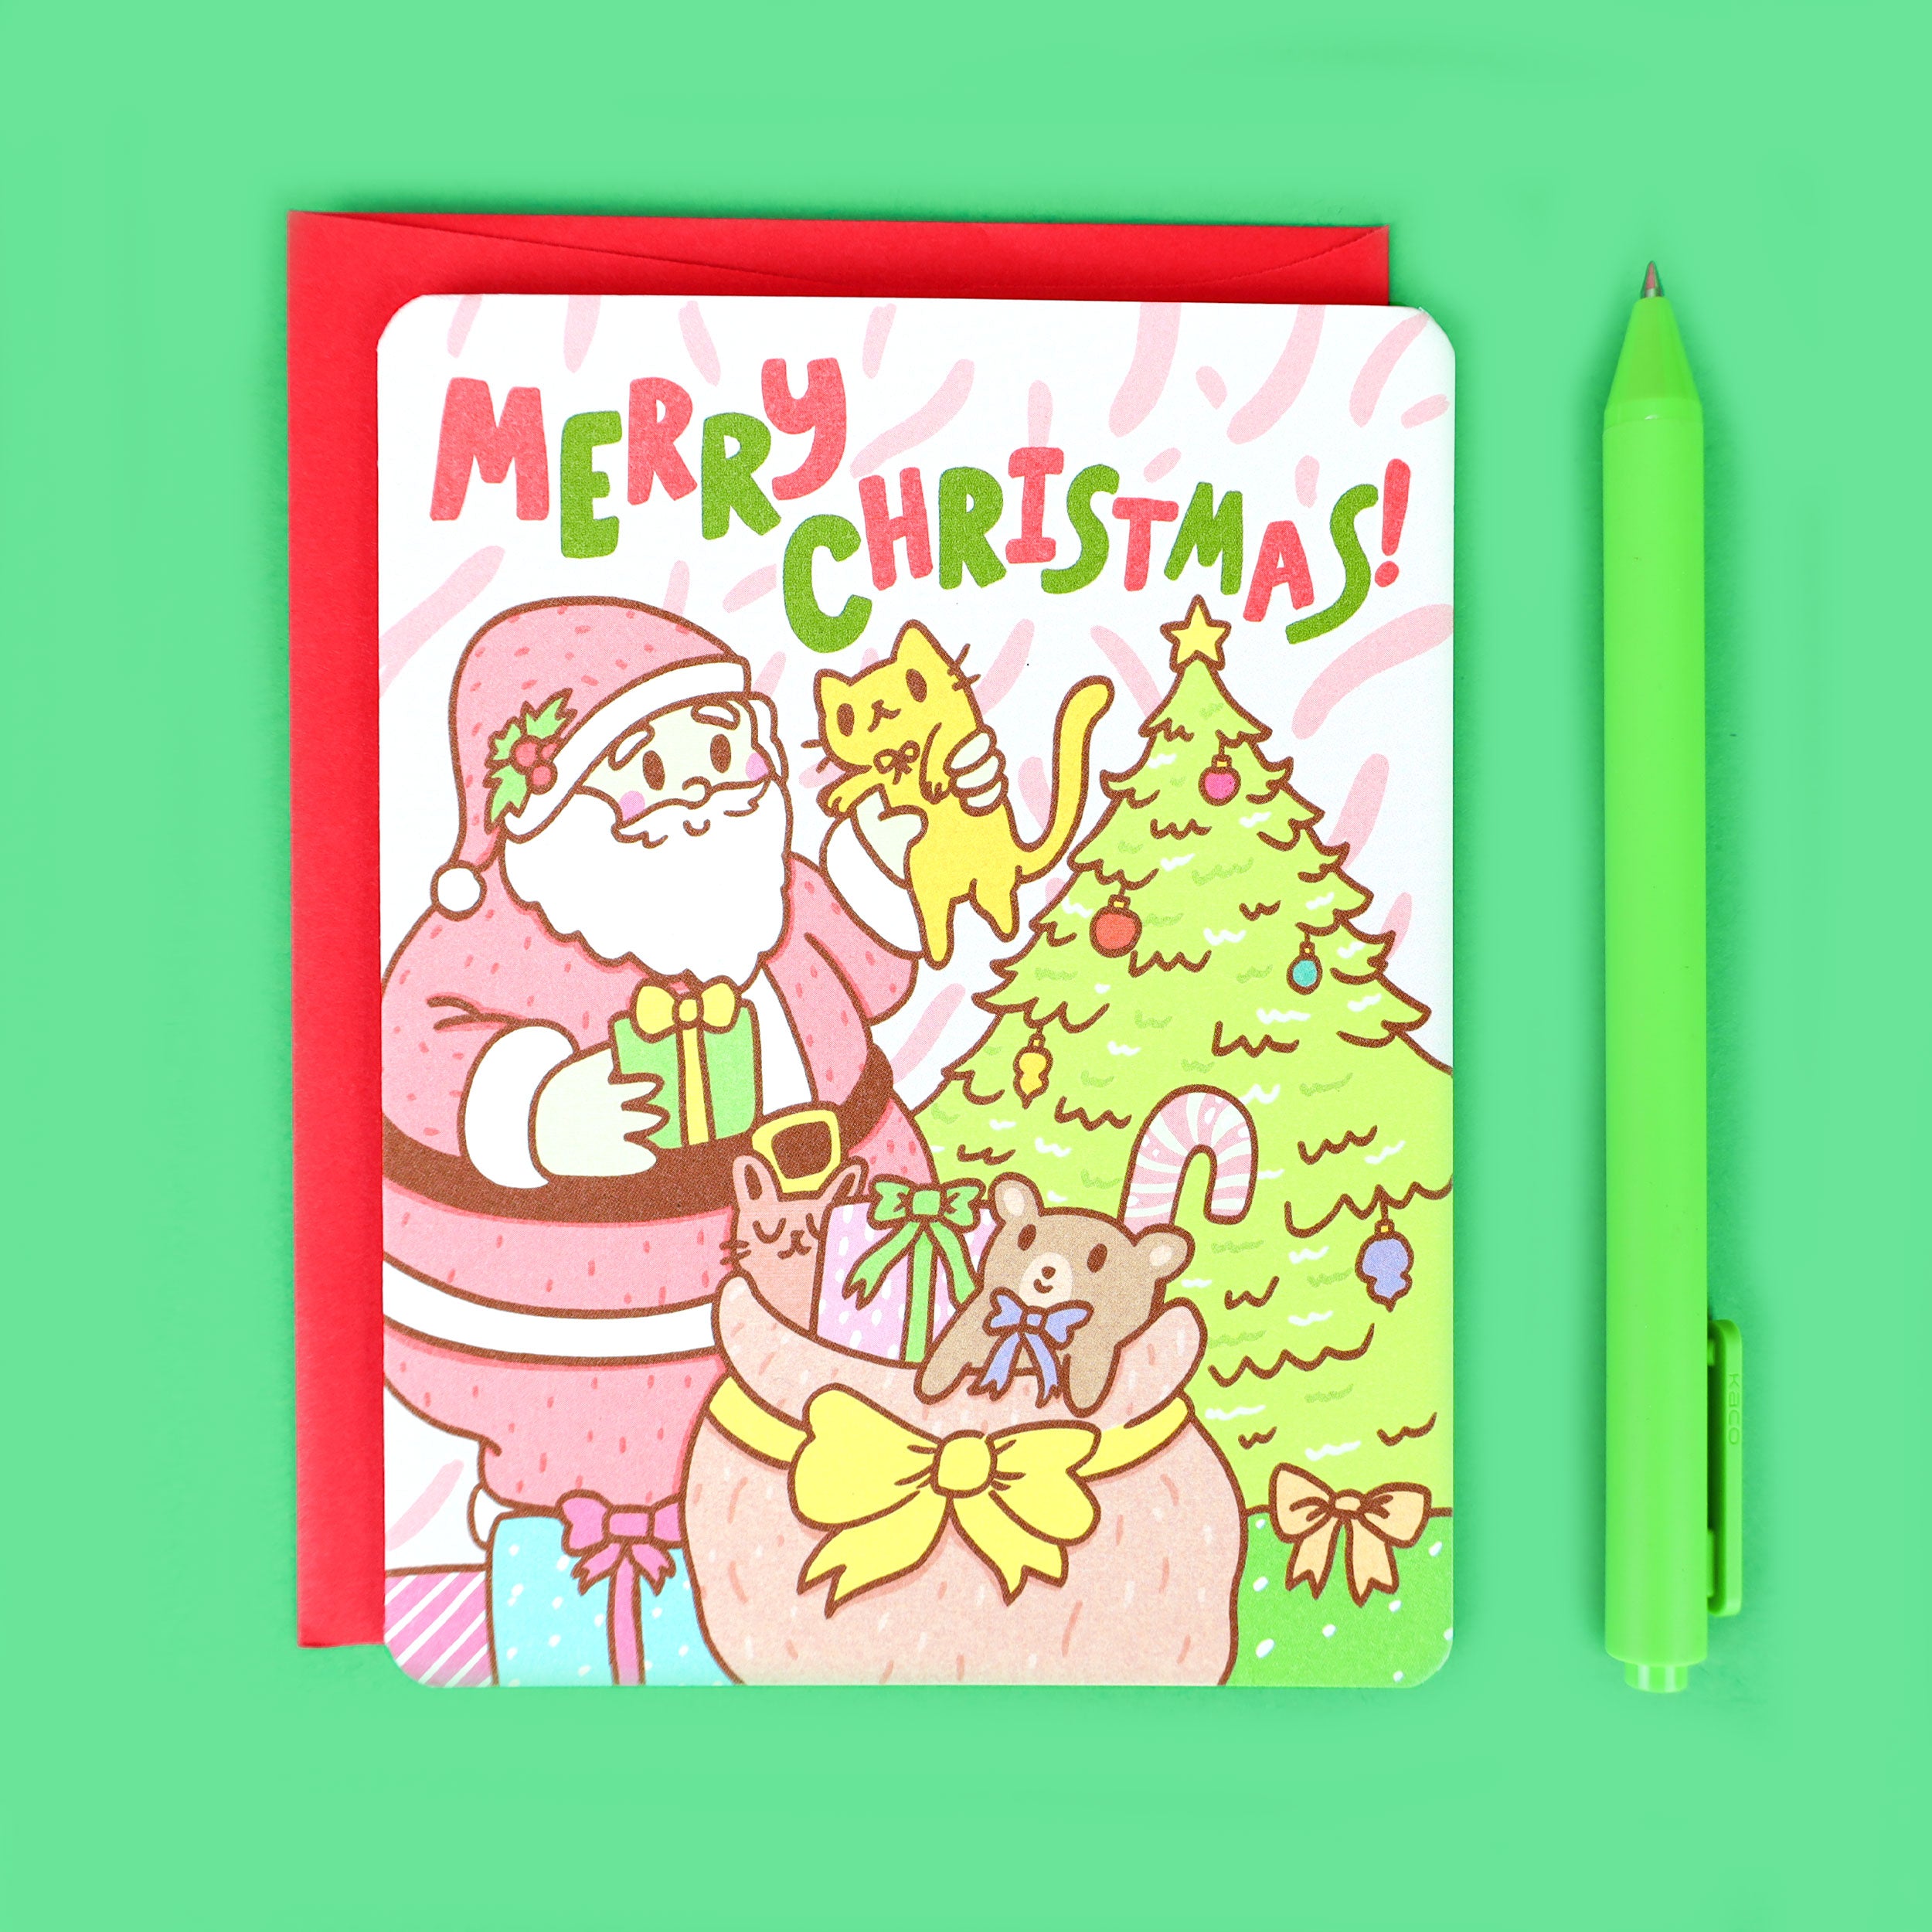 Pass On Your Season's Greetings With These Cute Christmas Cards | LBB